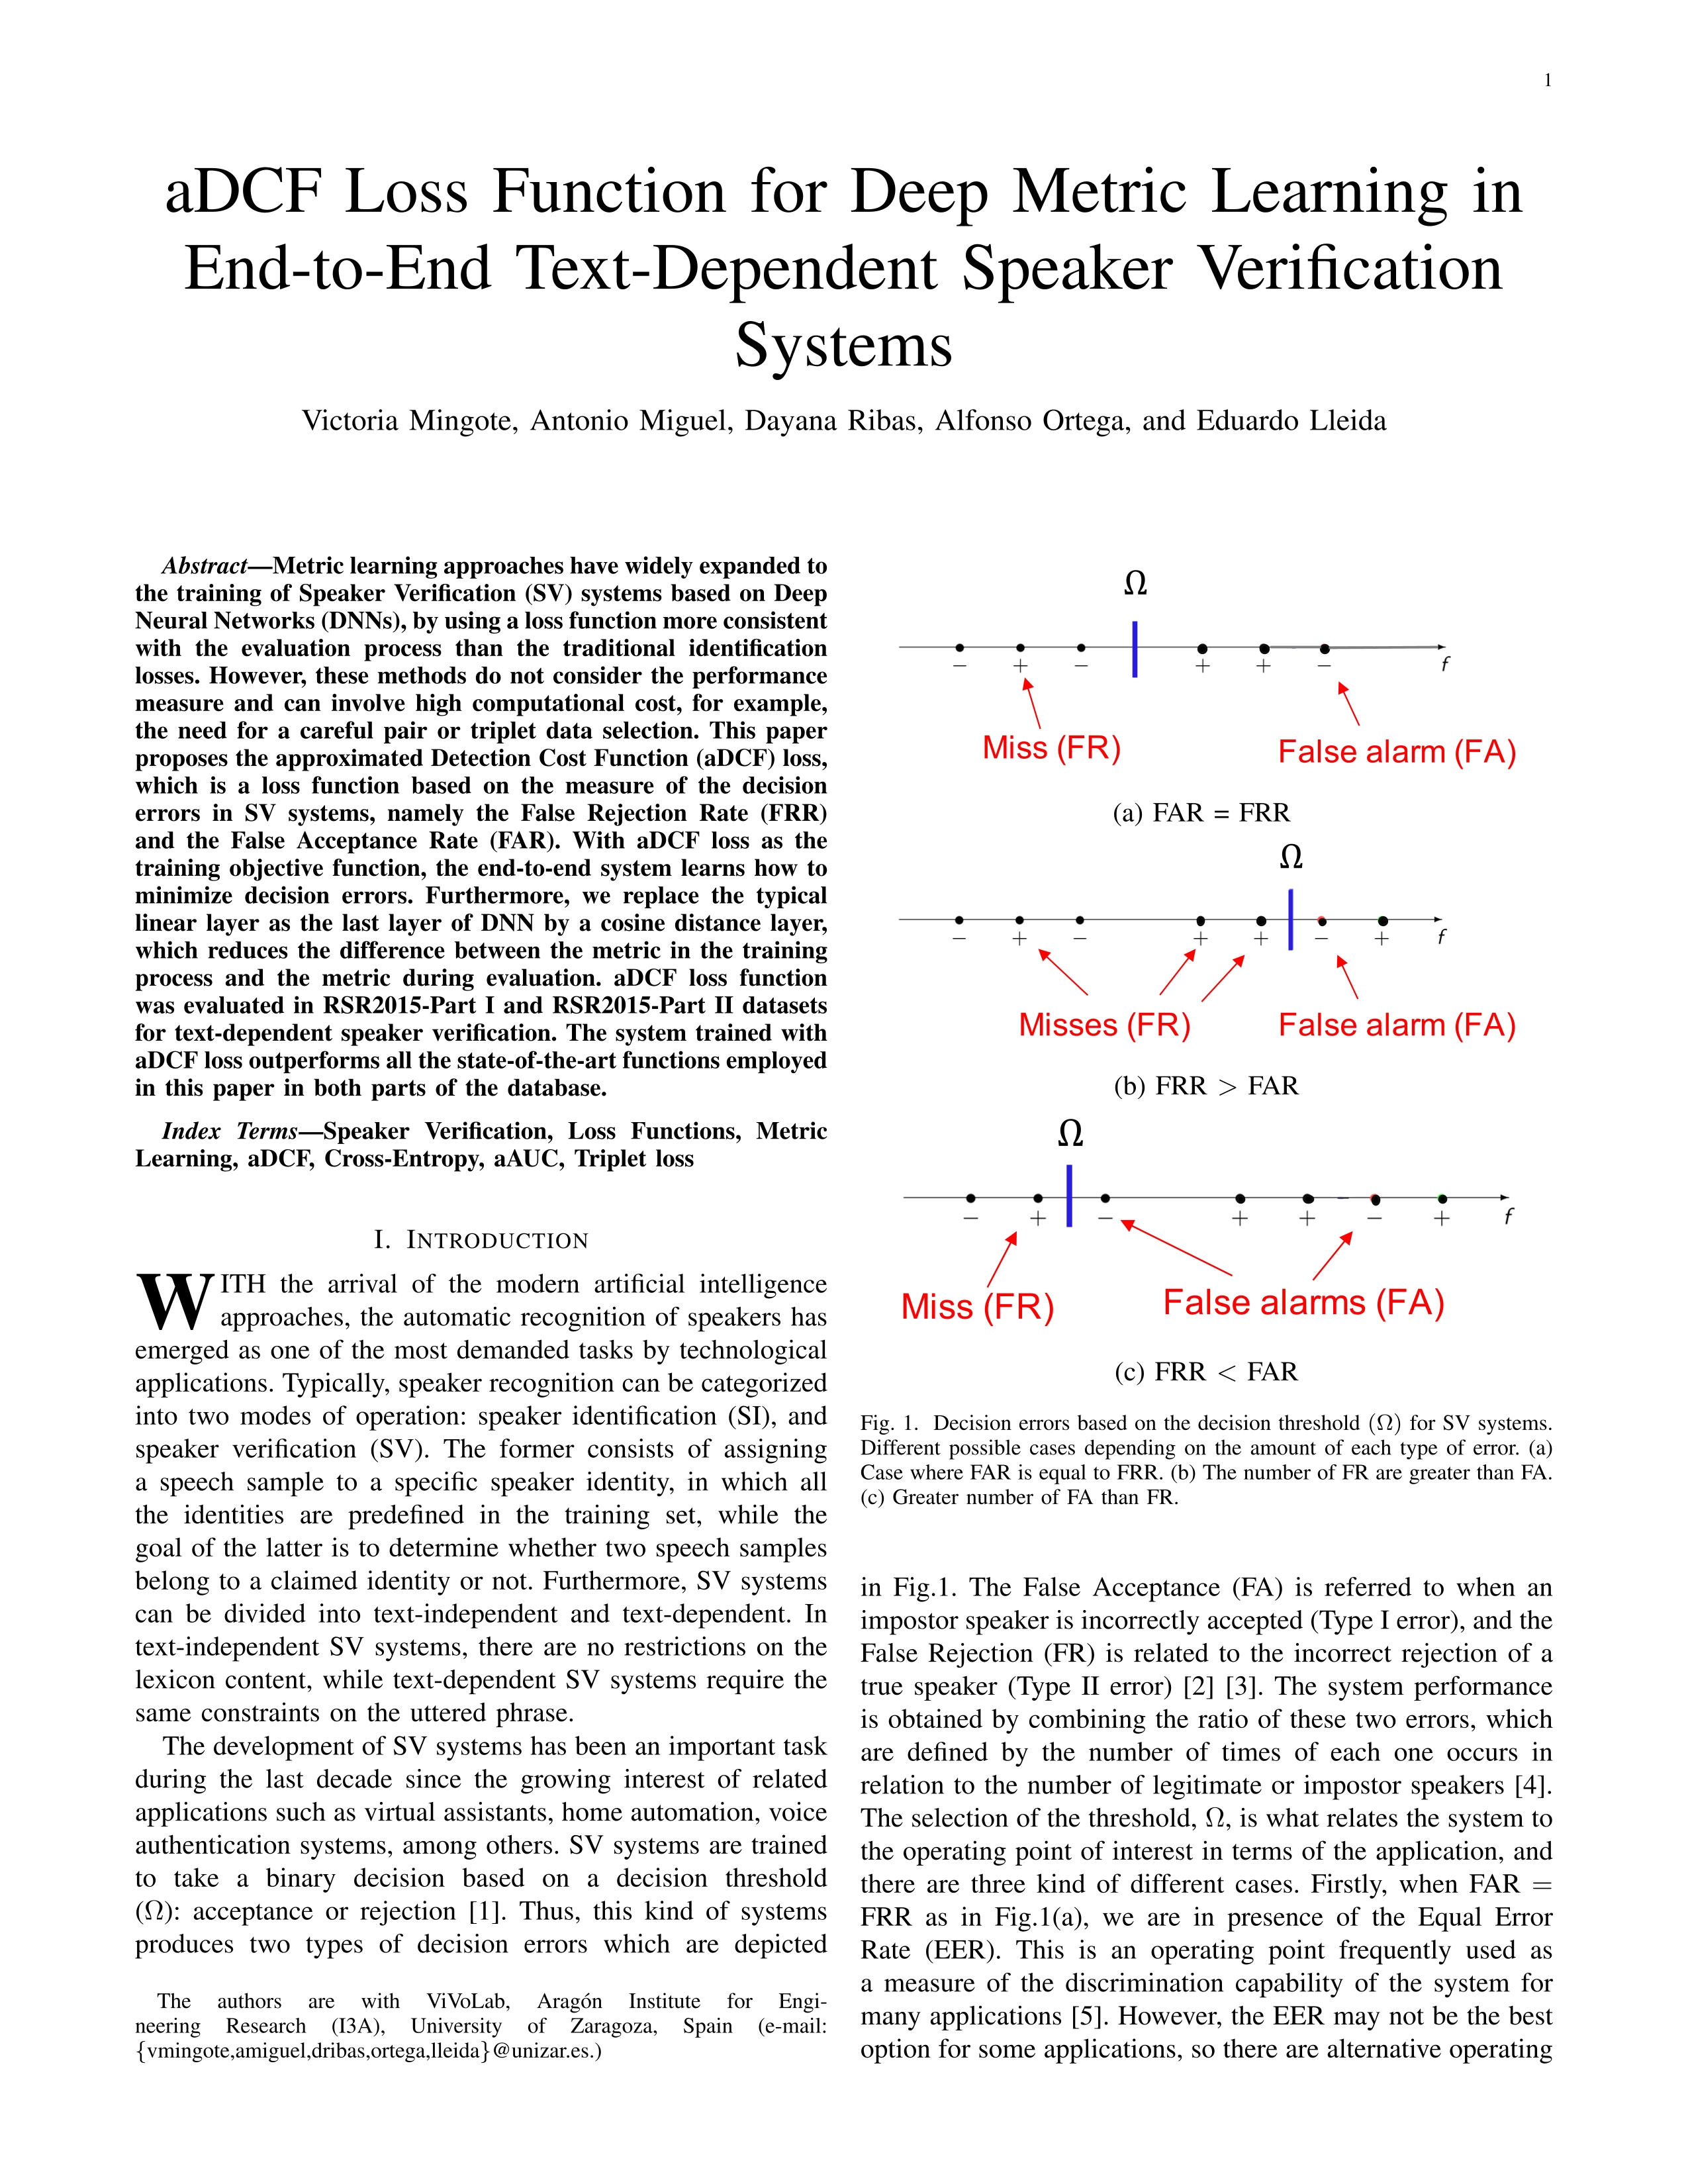 aDCF loss function for deep metric learning in end-to-end text-dependent speaker verification systems